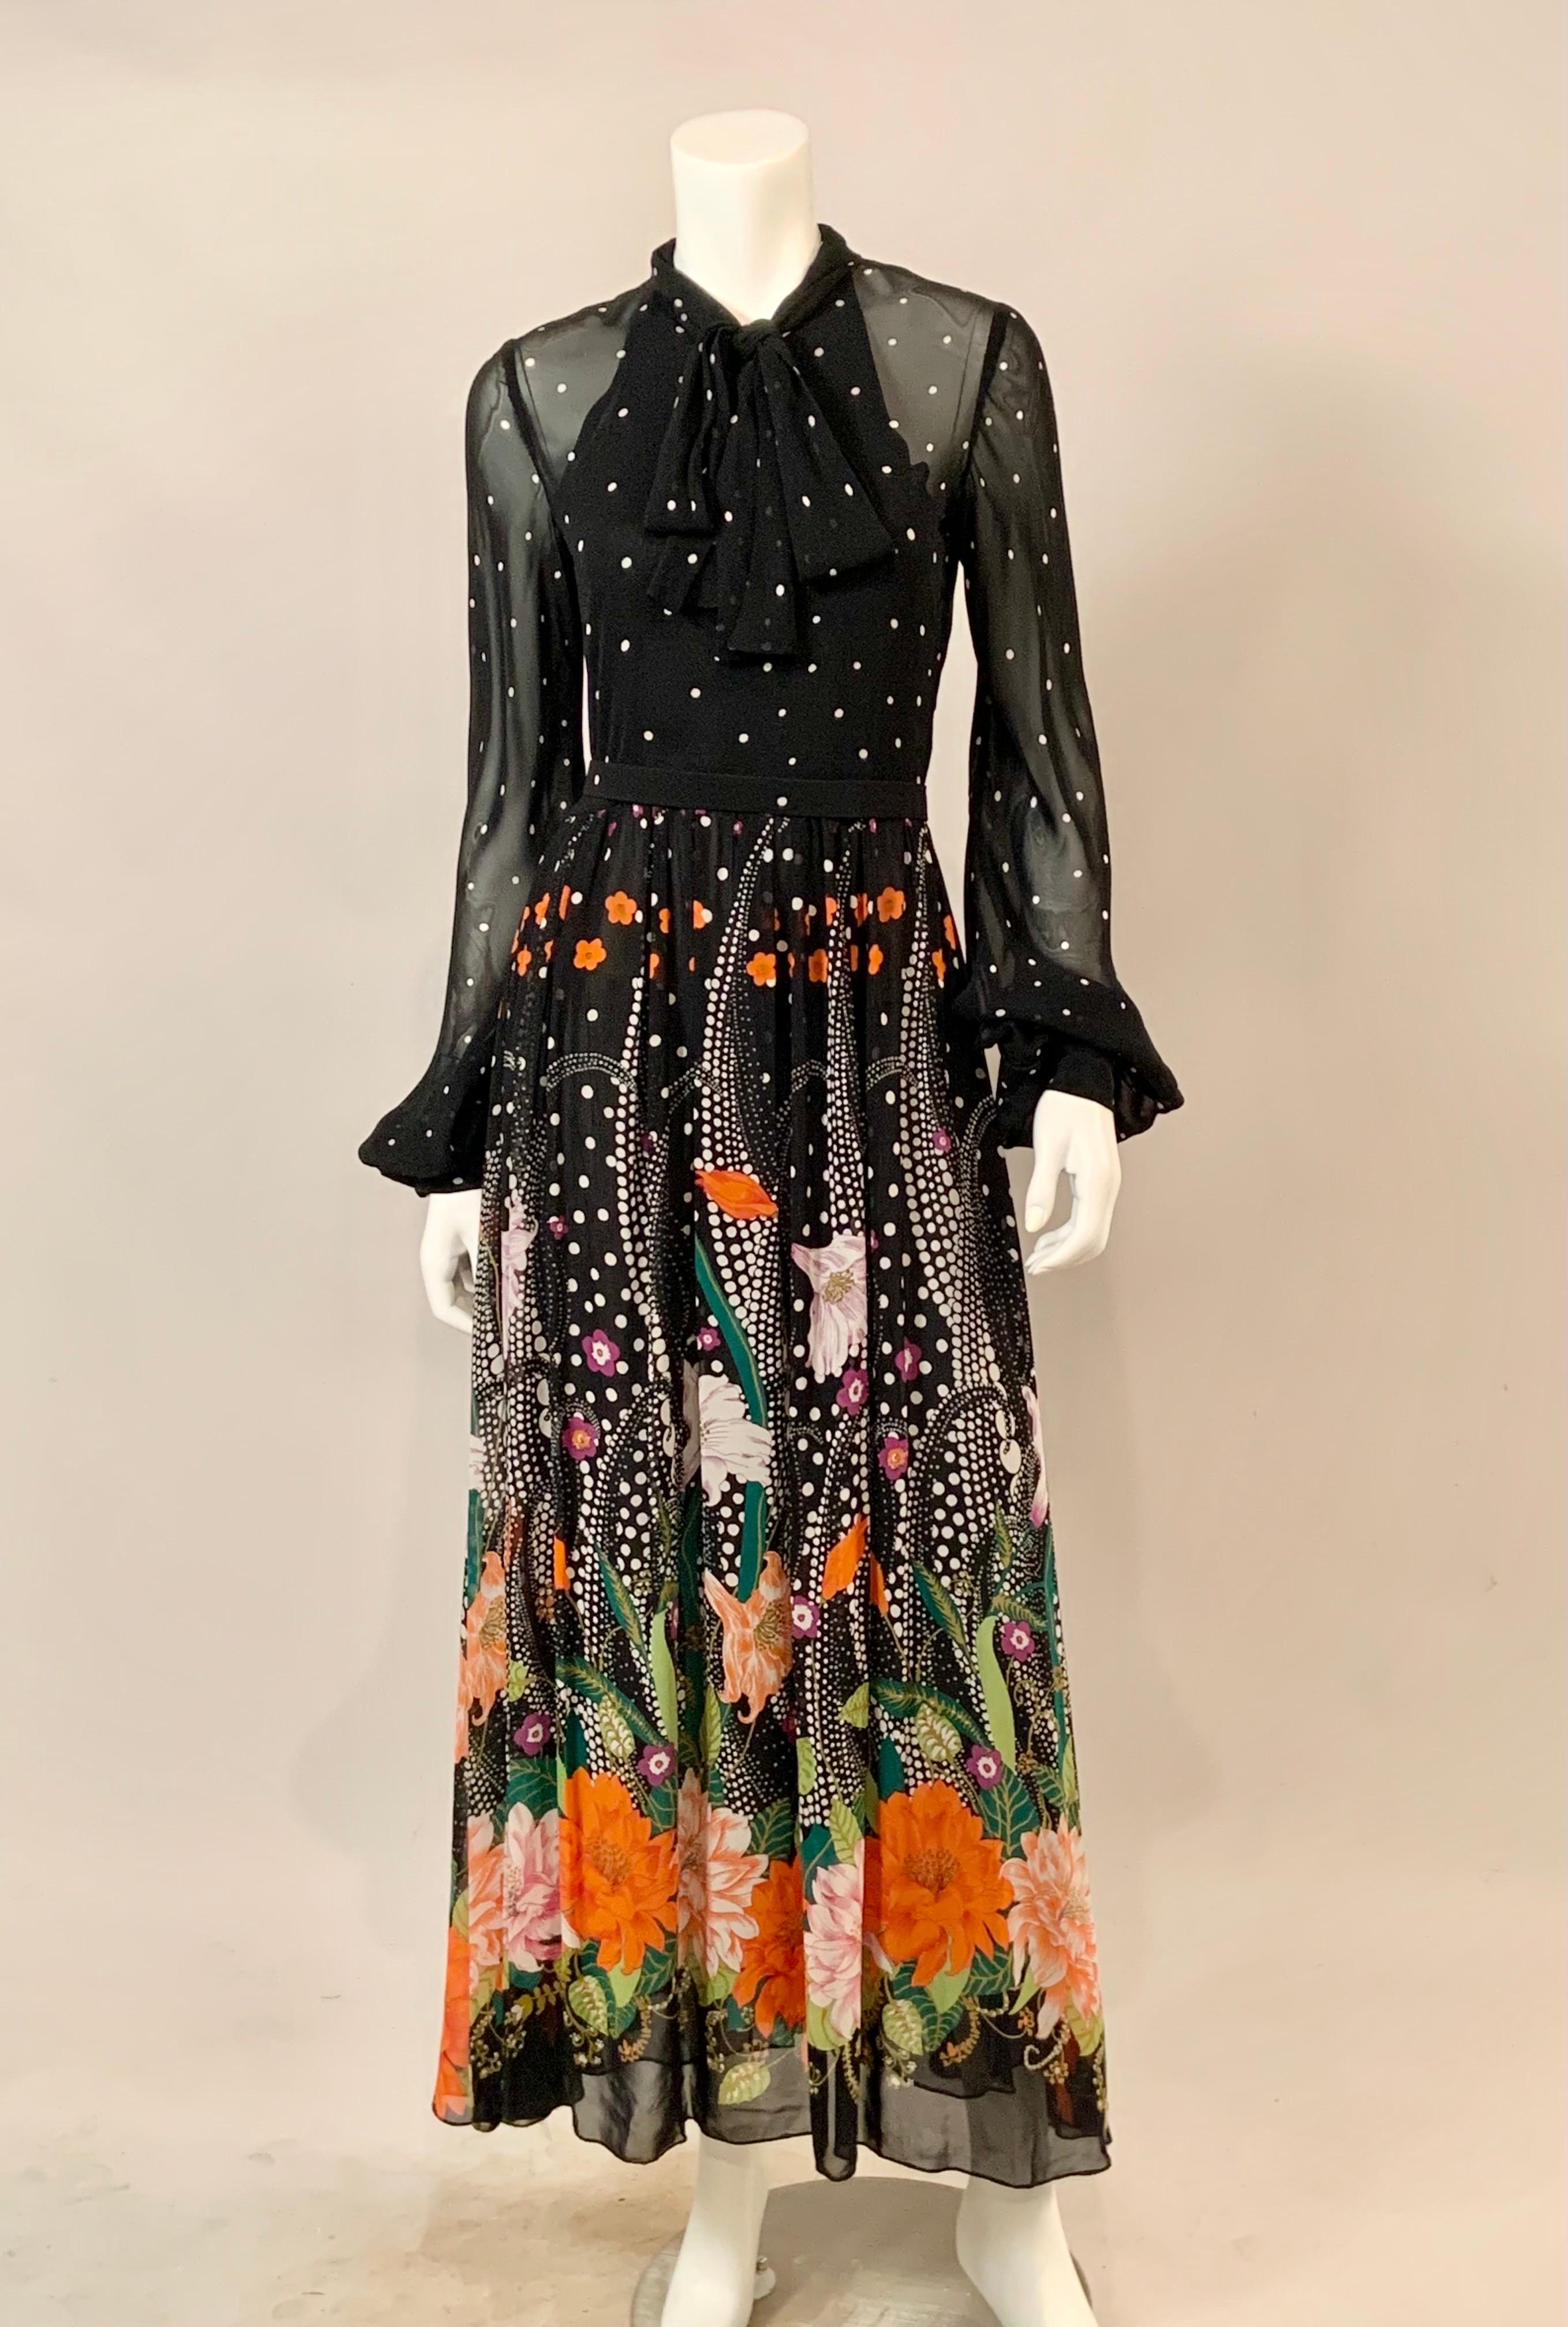 1970's Chiffon Maxi Dress with a Polka Dot and Flower Print For Sale 9